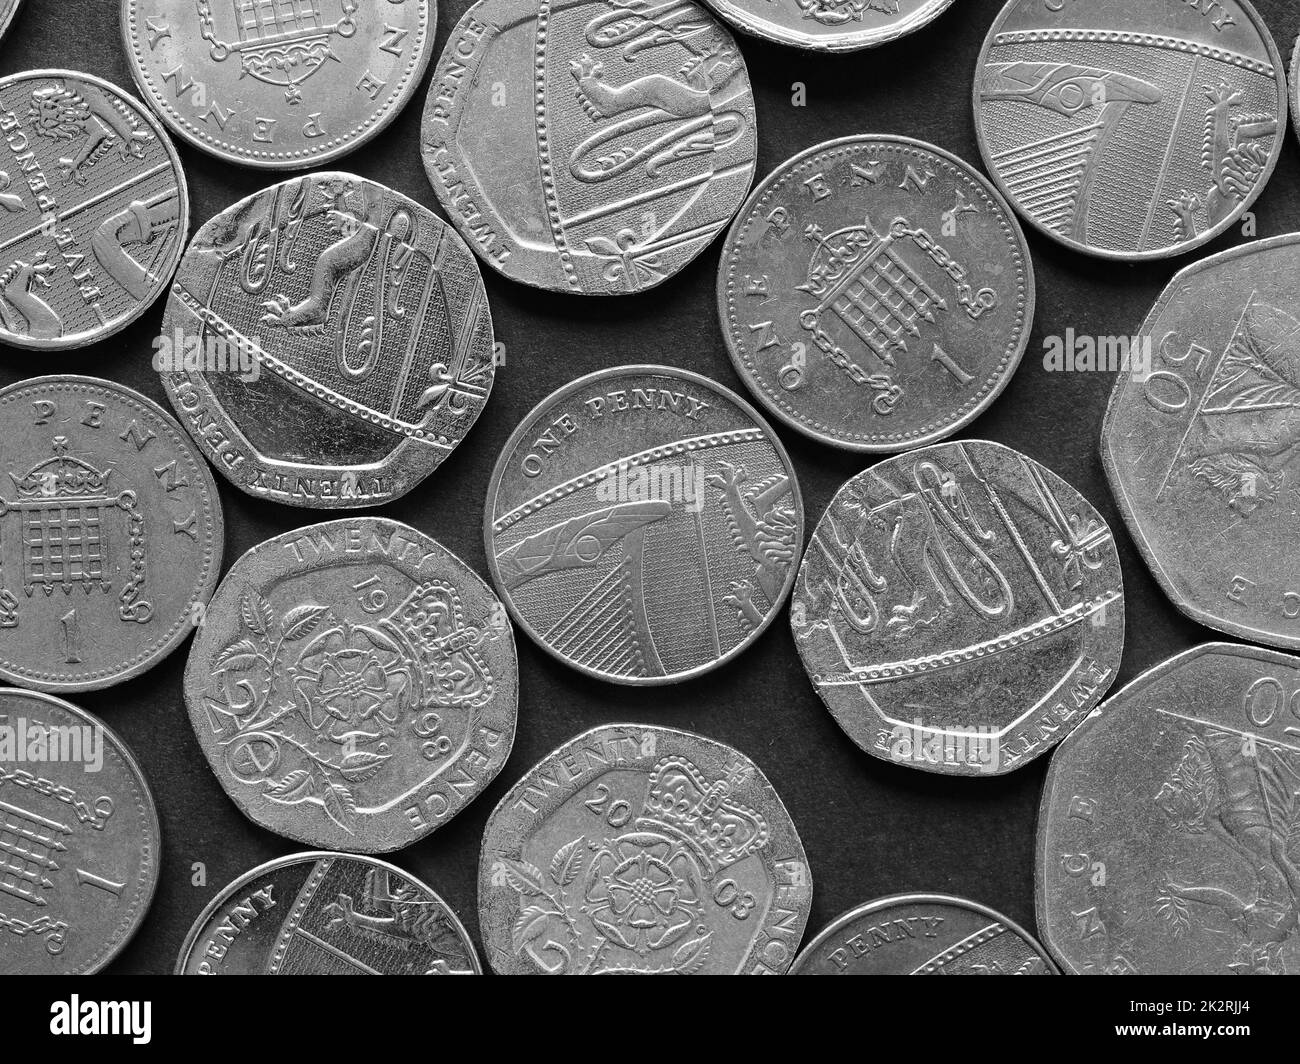 Pound coins, United Kingdom in black and white Stock Photo